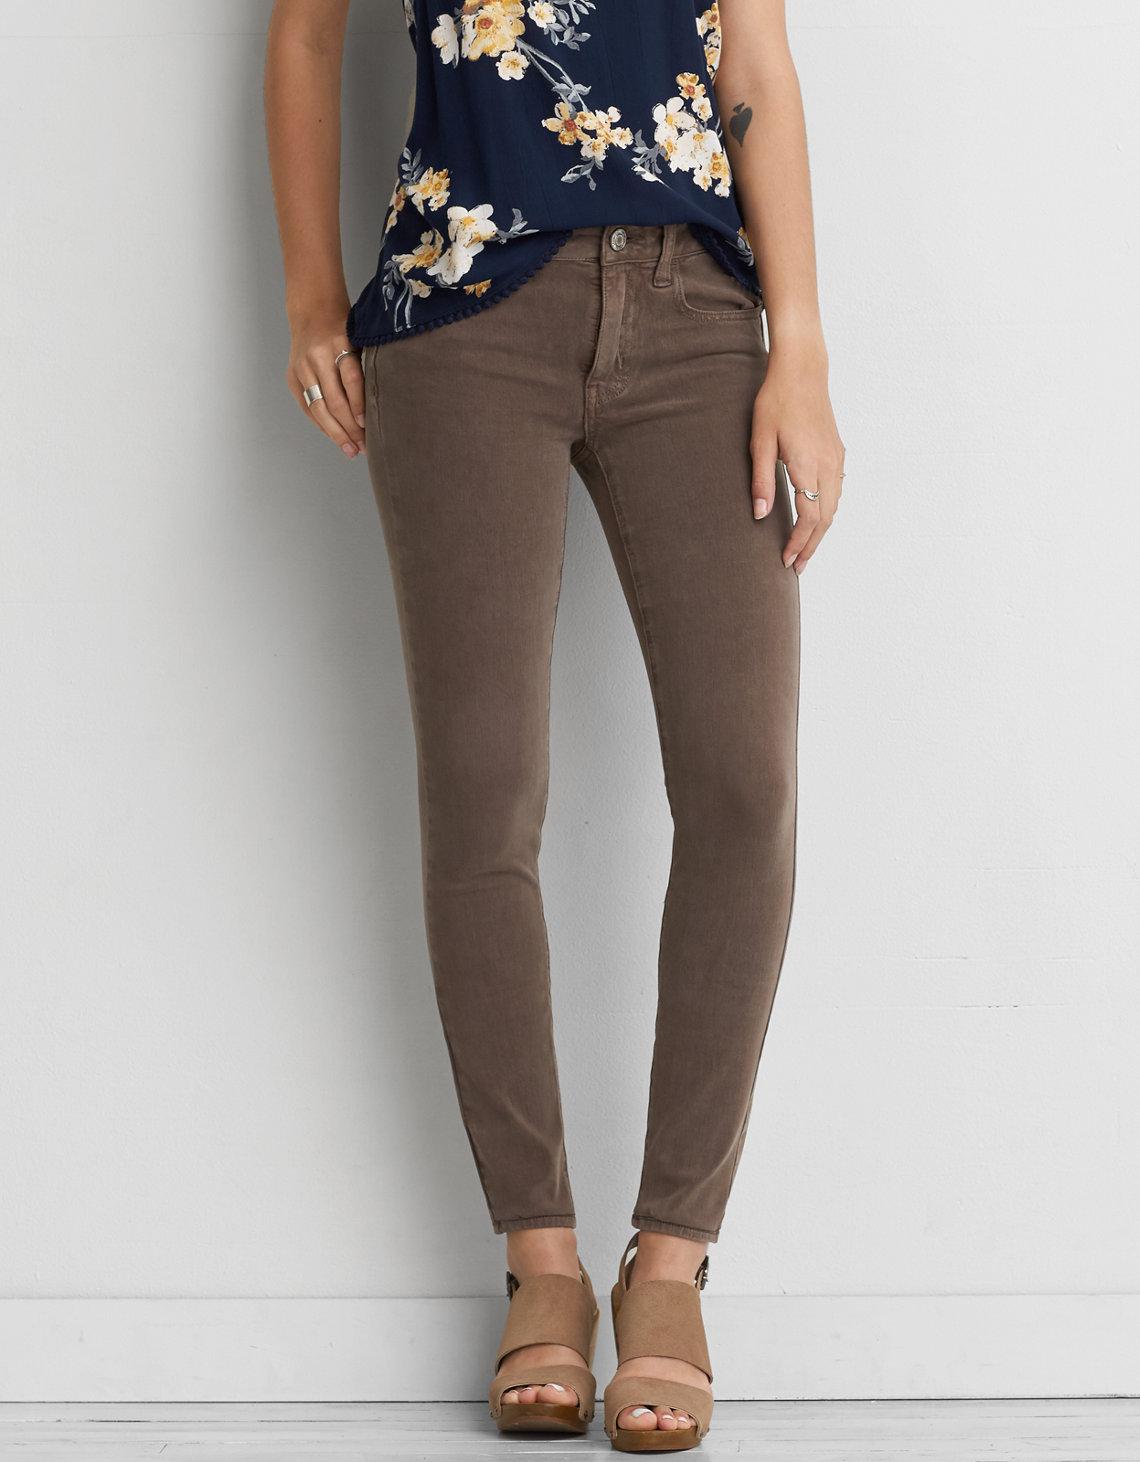 taupe jeggings